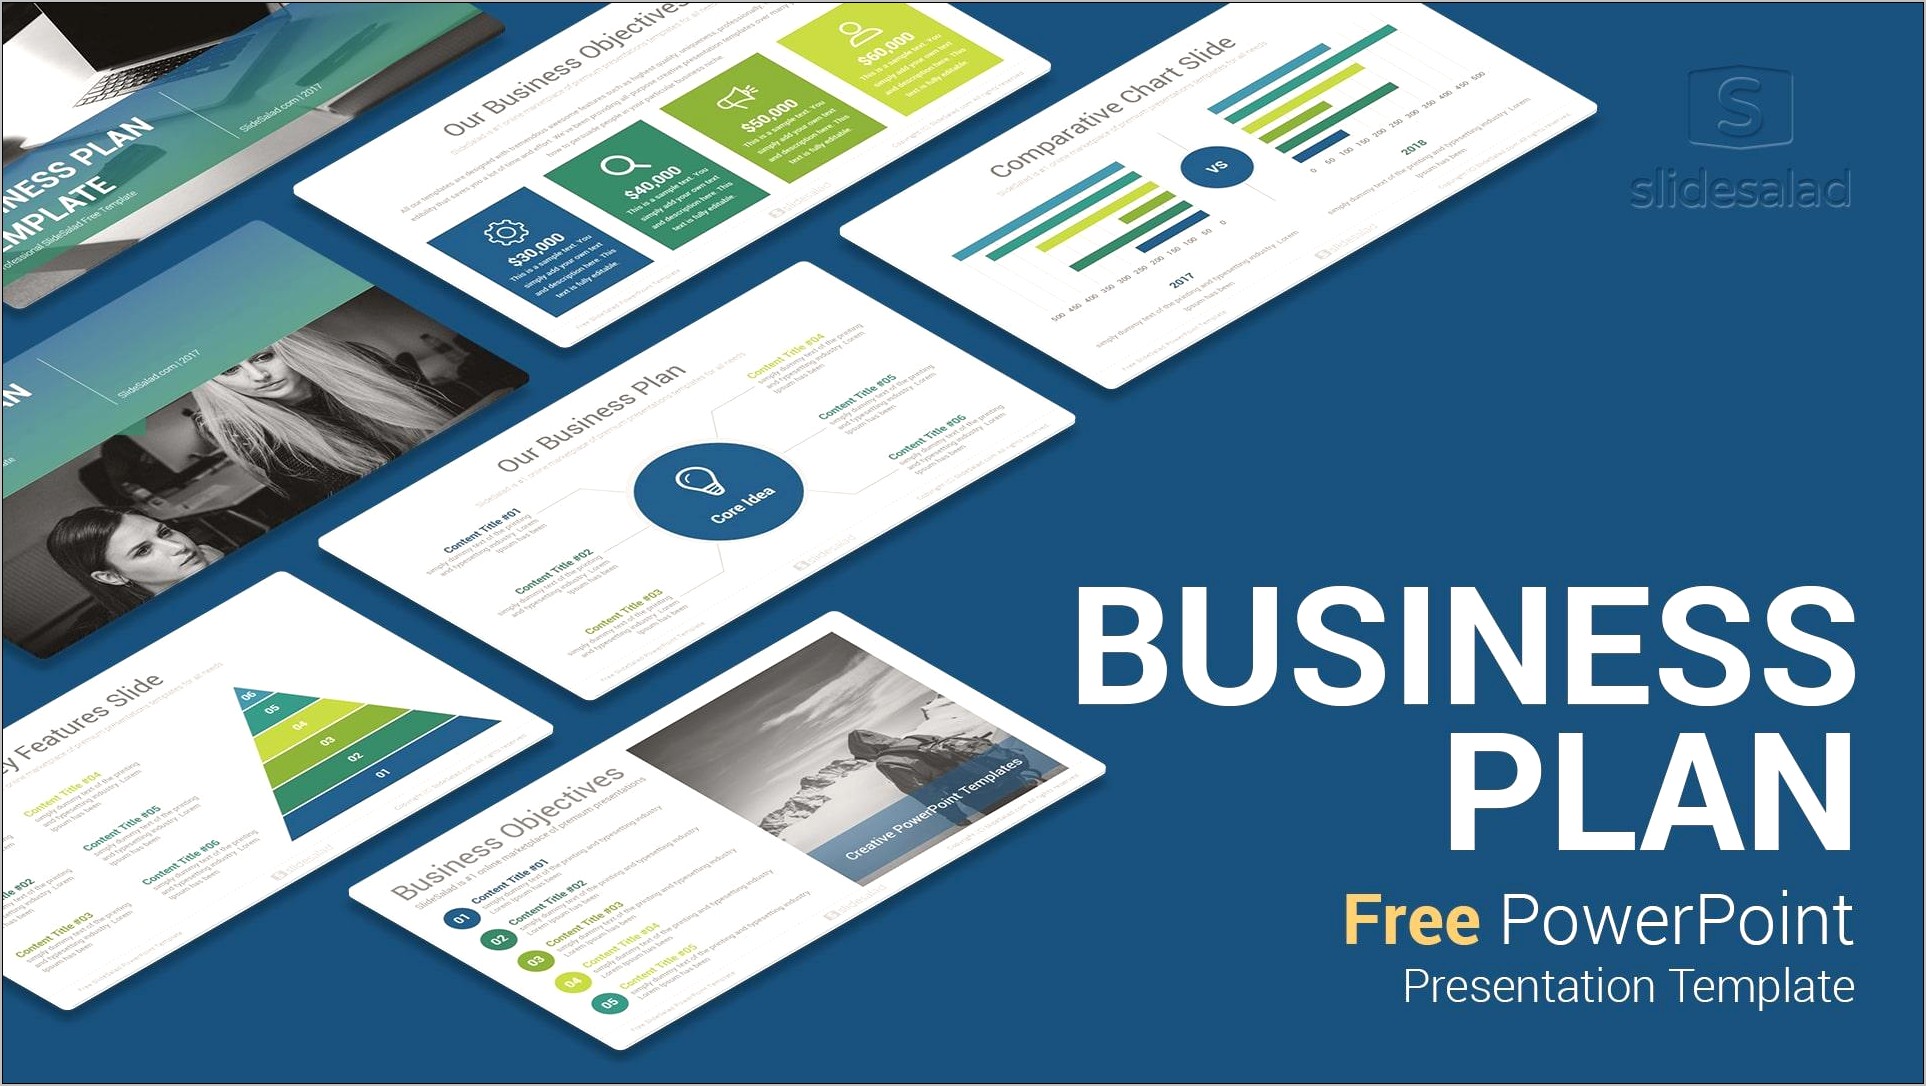 Download Template Ppt Business Plan Free